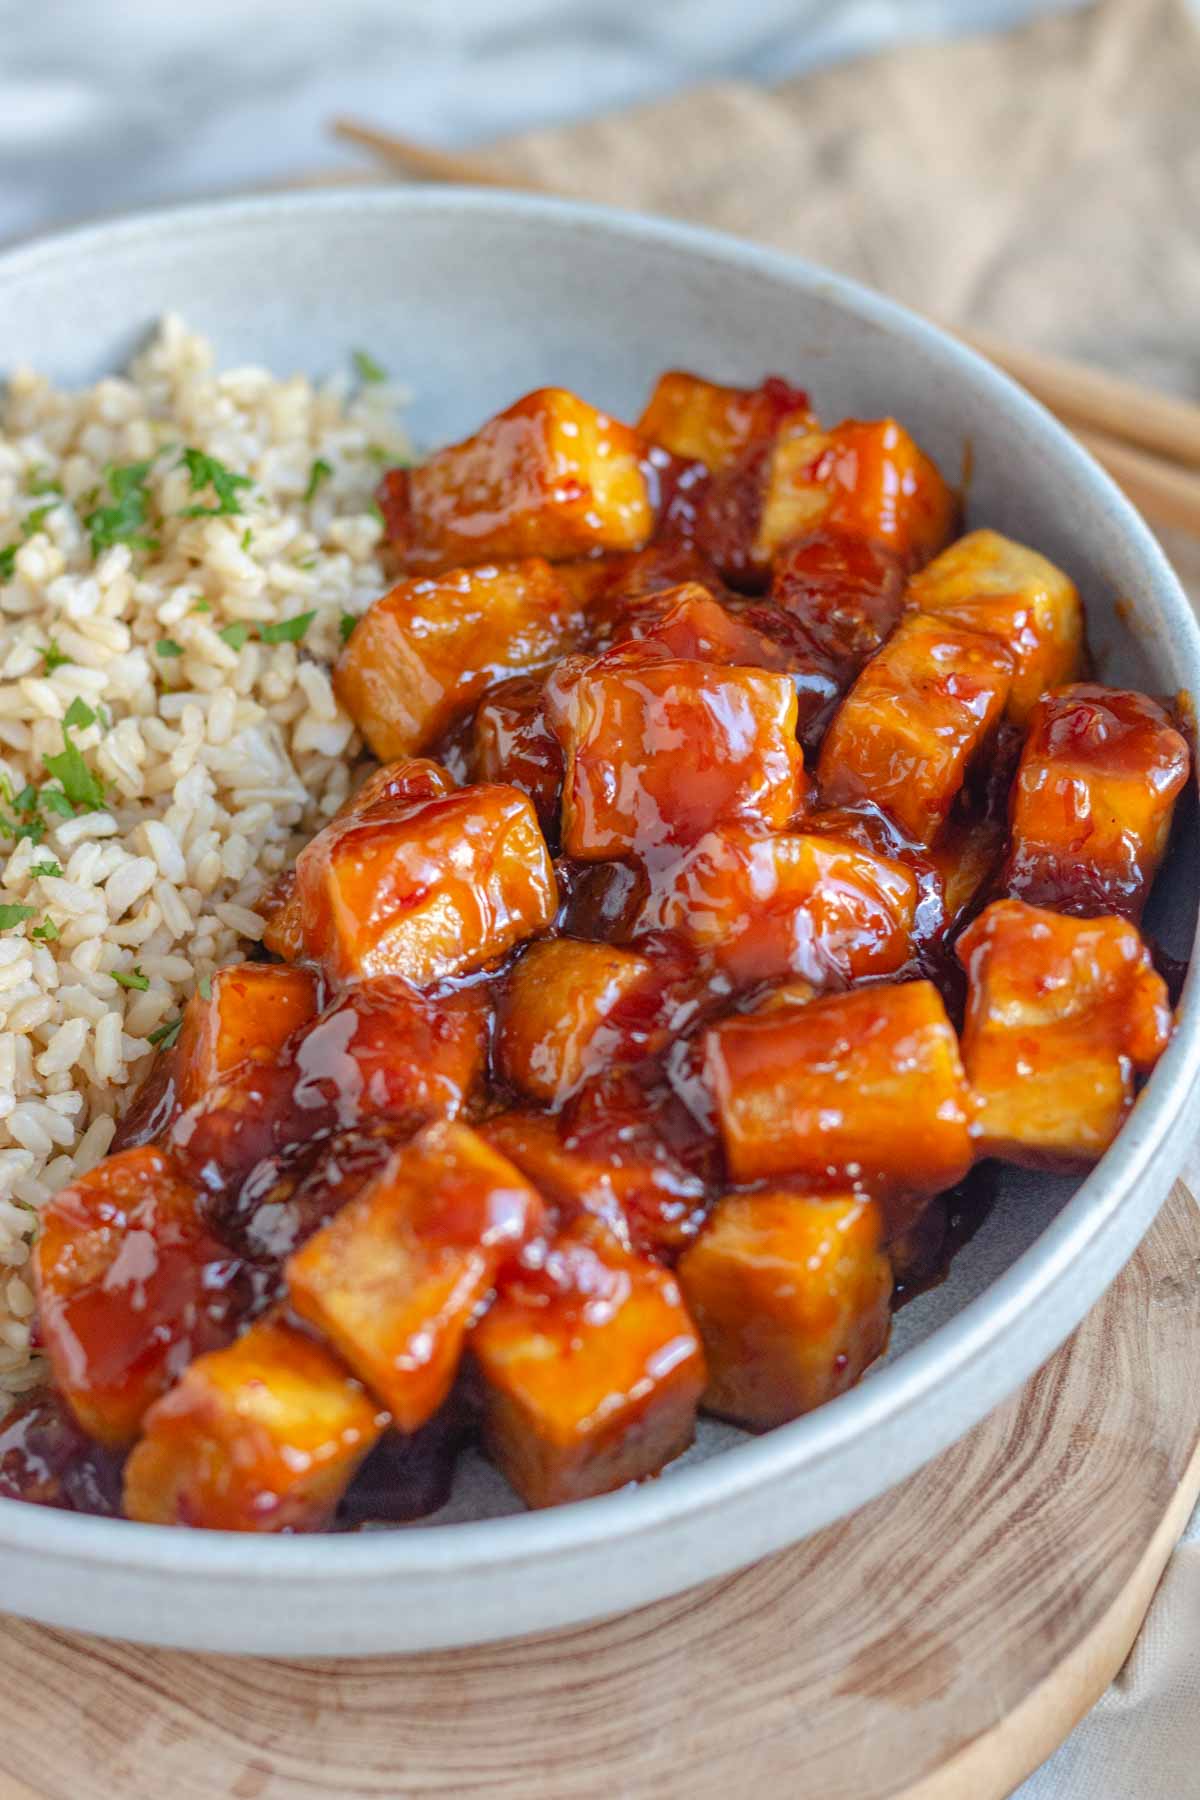 Sweet chili tofu and rice in a bowl.